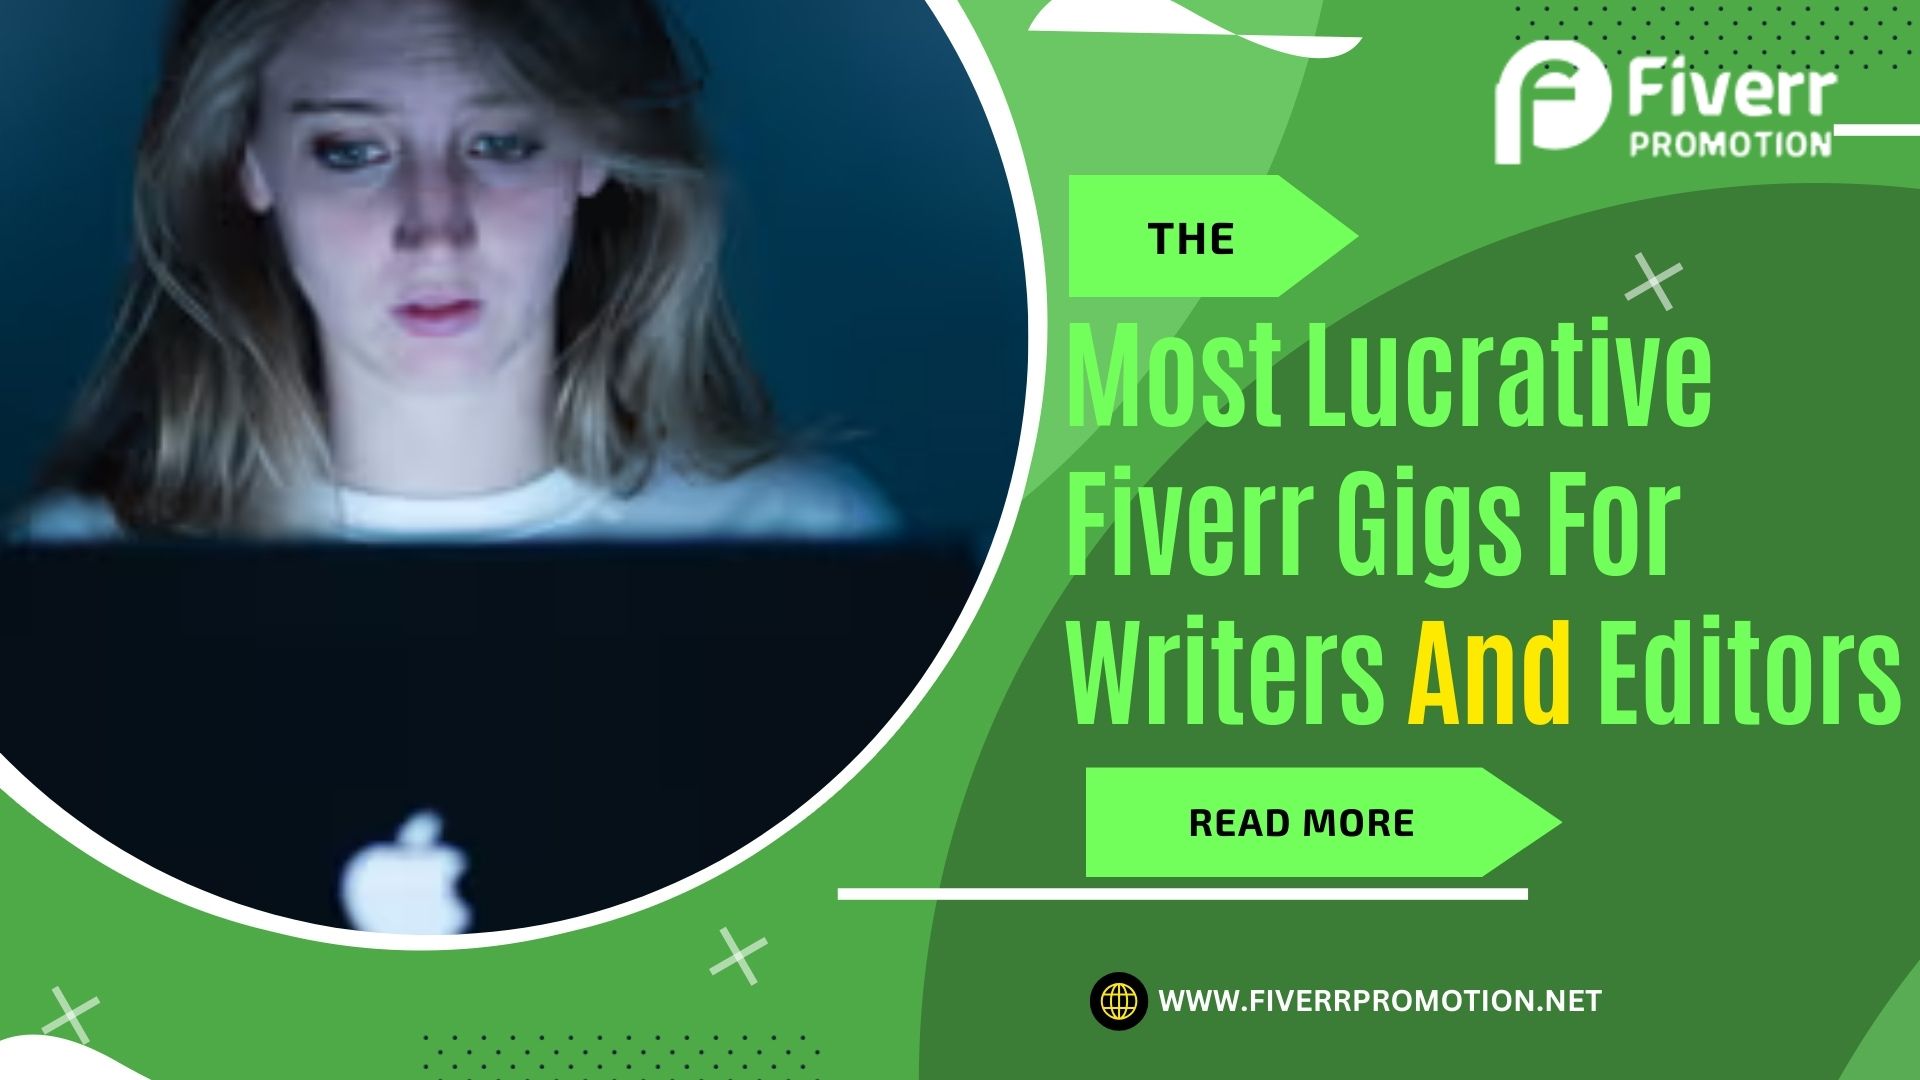 The most lucrative Fiverr gigs for writers and editors